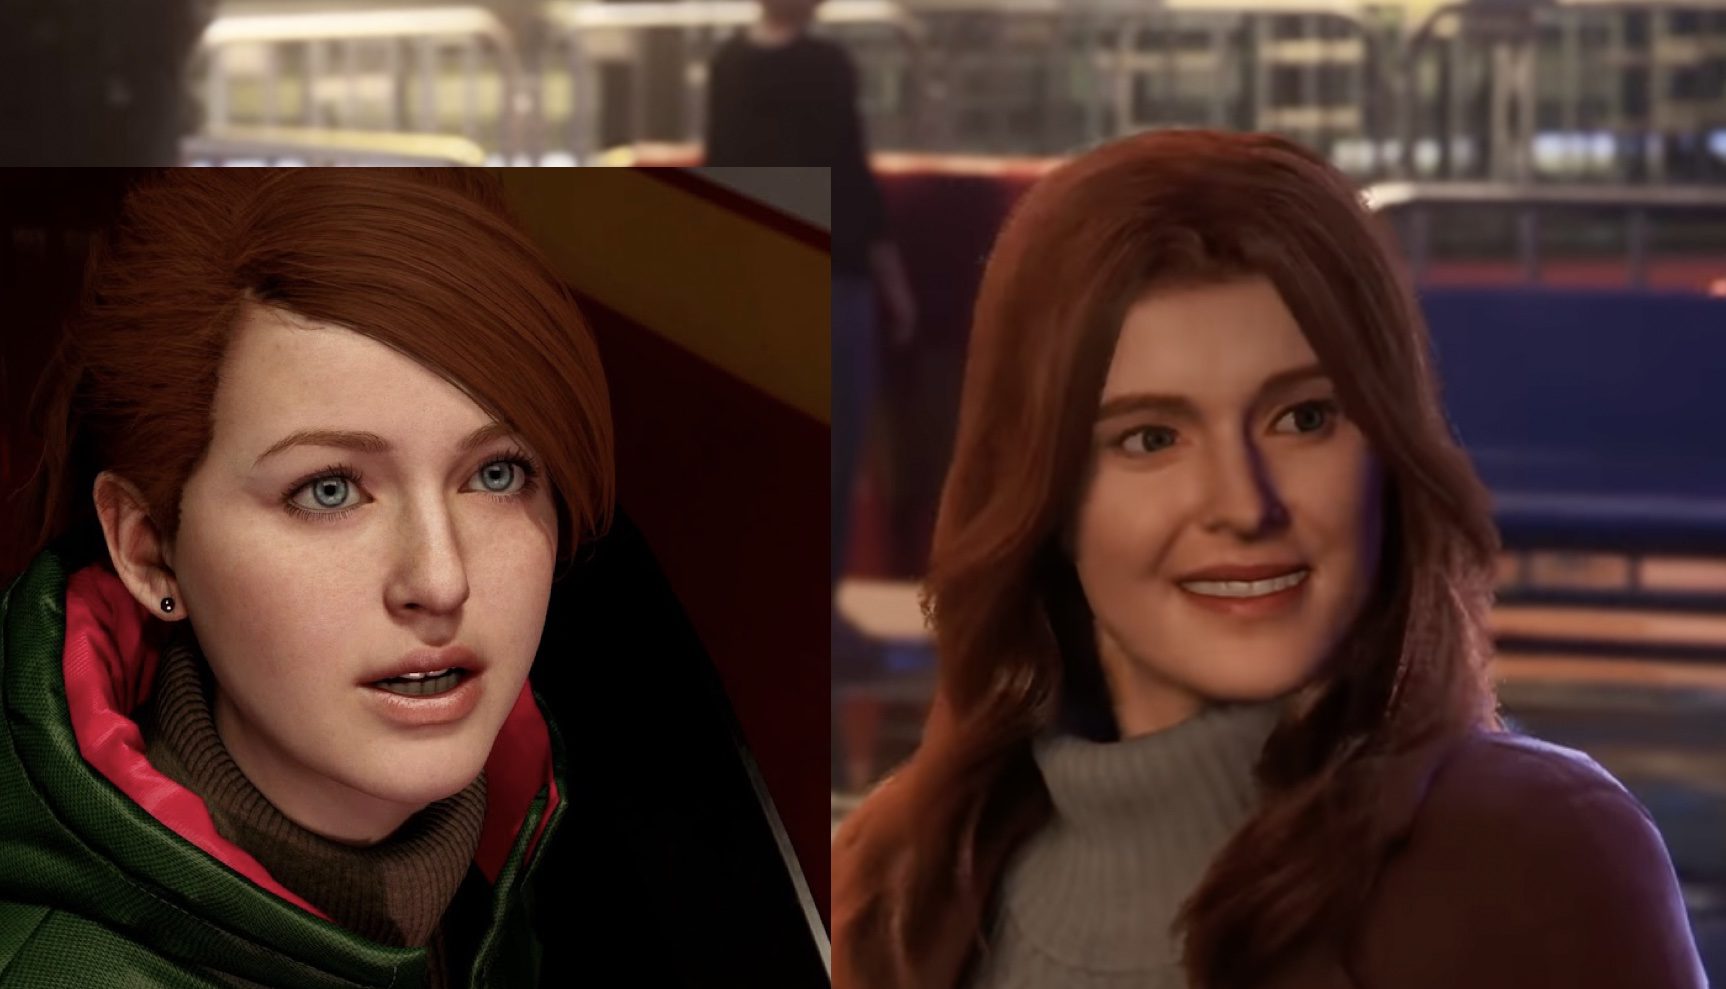 Marvel’s Spider-Man 2: Mary Jane’s Changing Face or Improved Technology?